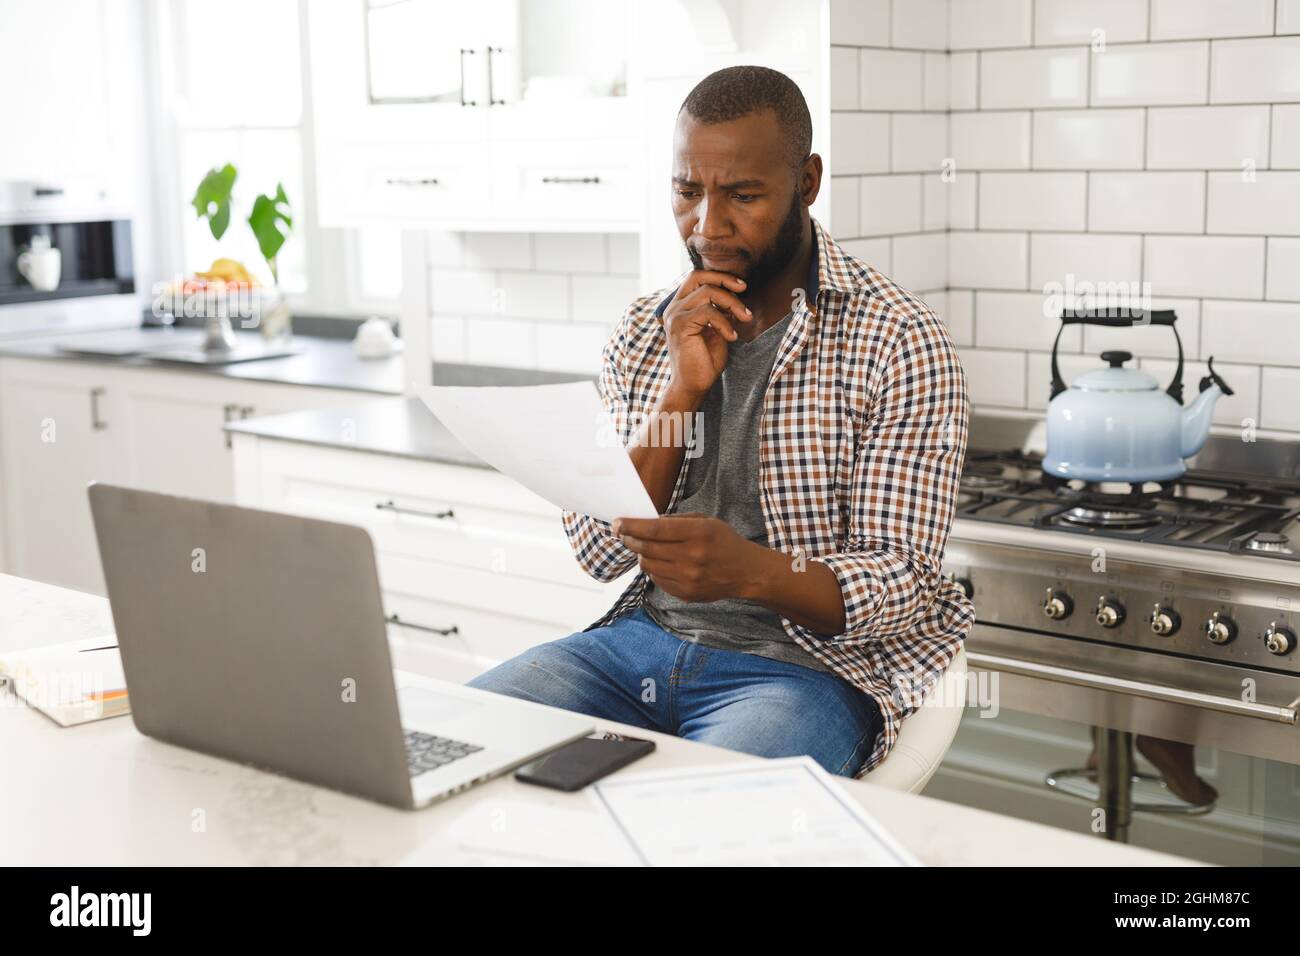 Serious african american man sitting in kitchen working looking at paperwork and using laptop Stock Photo